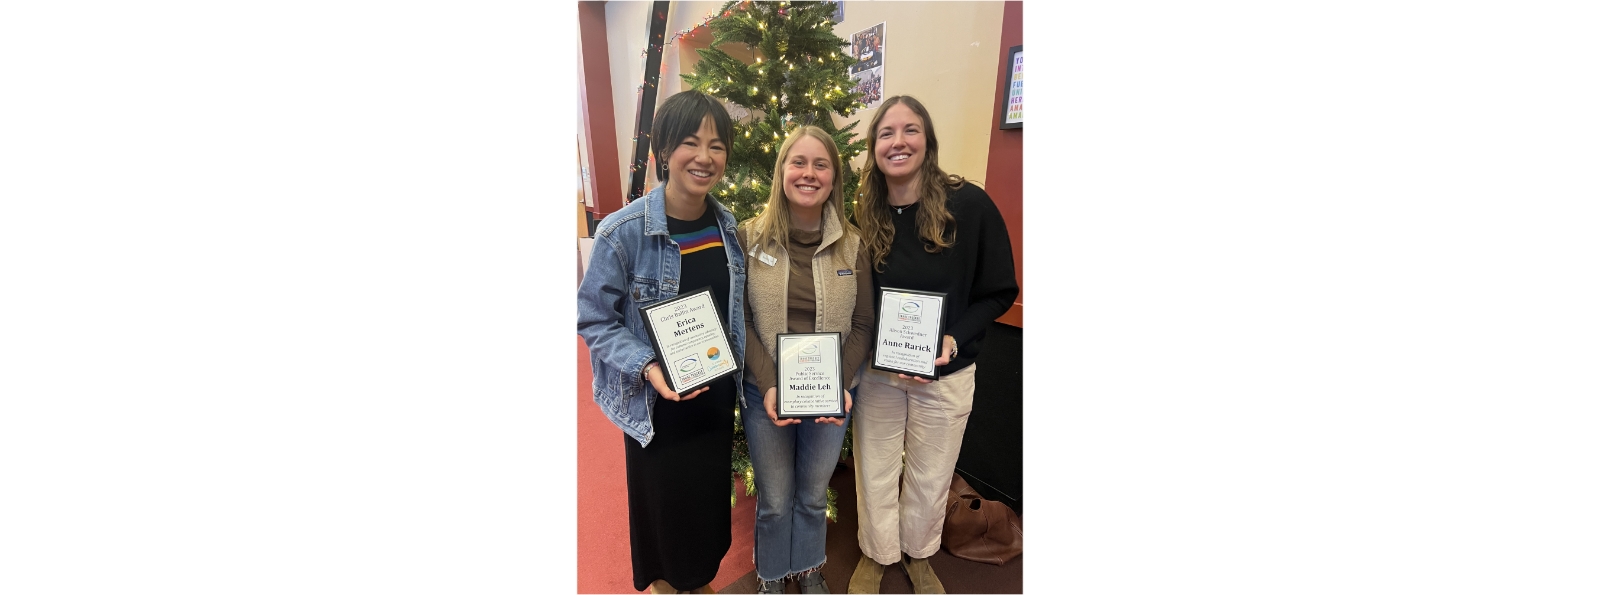 The Community Collaborative Honors Three Outstanding Social Service Professionals in Tahoe Truckee